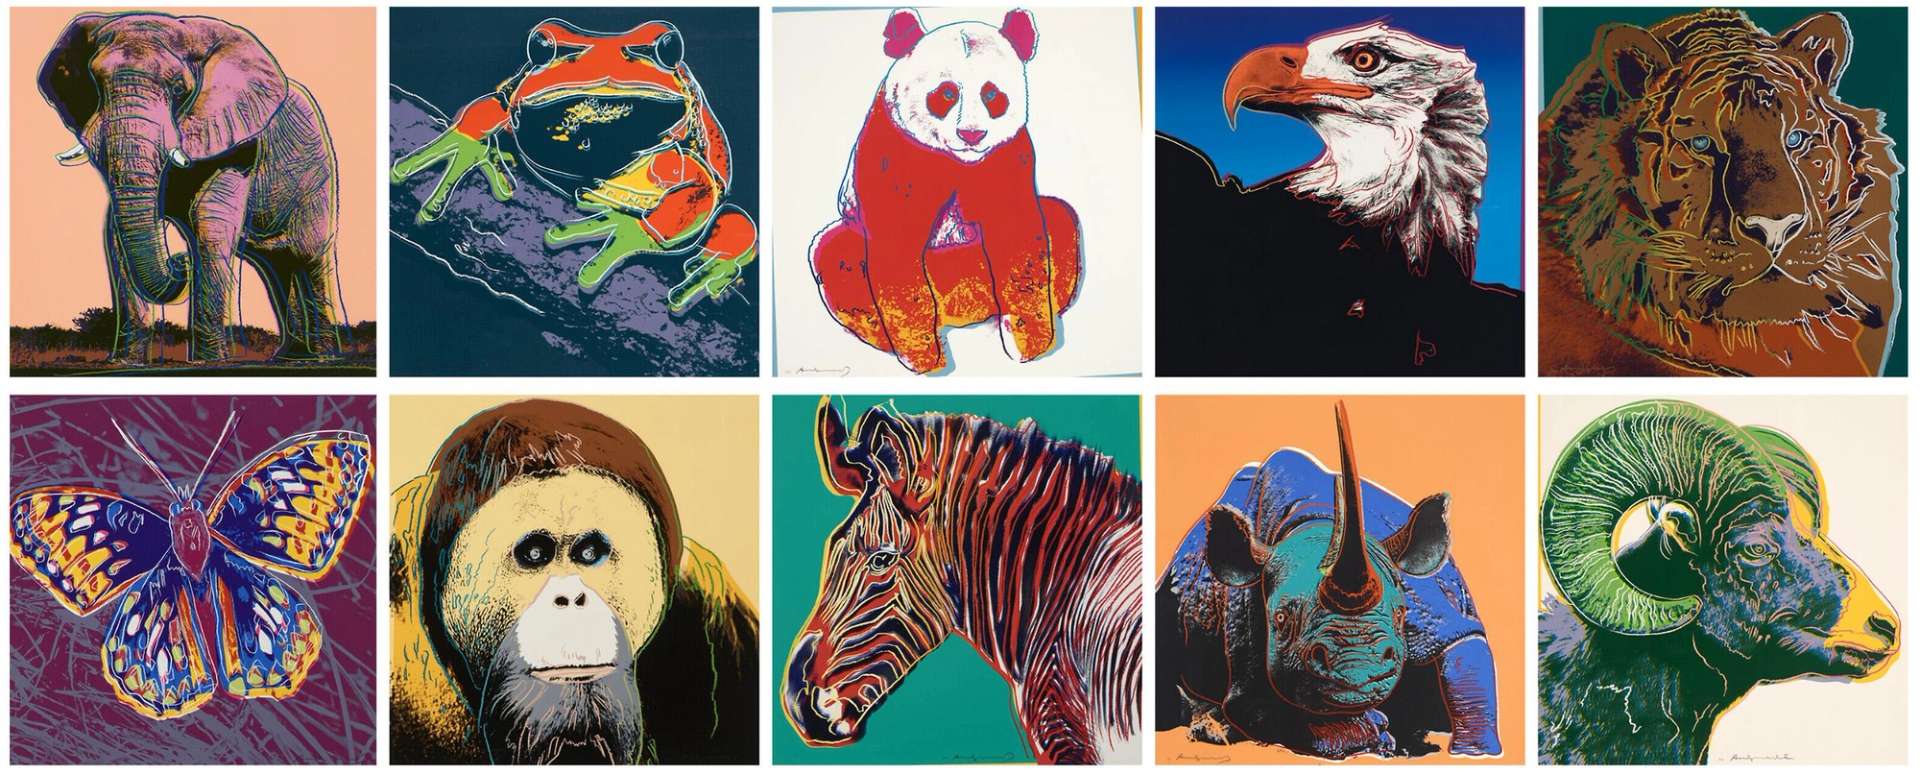 Endangered Species (complete set) by Andy Warhol